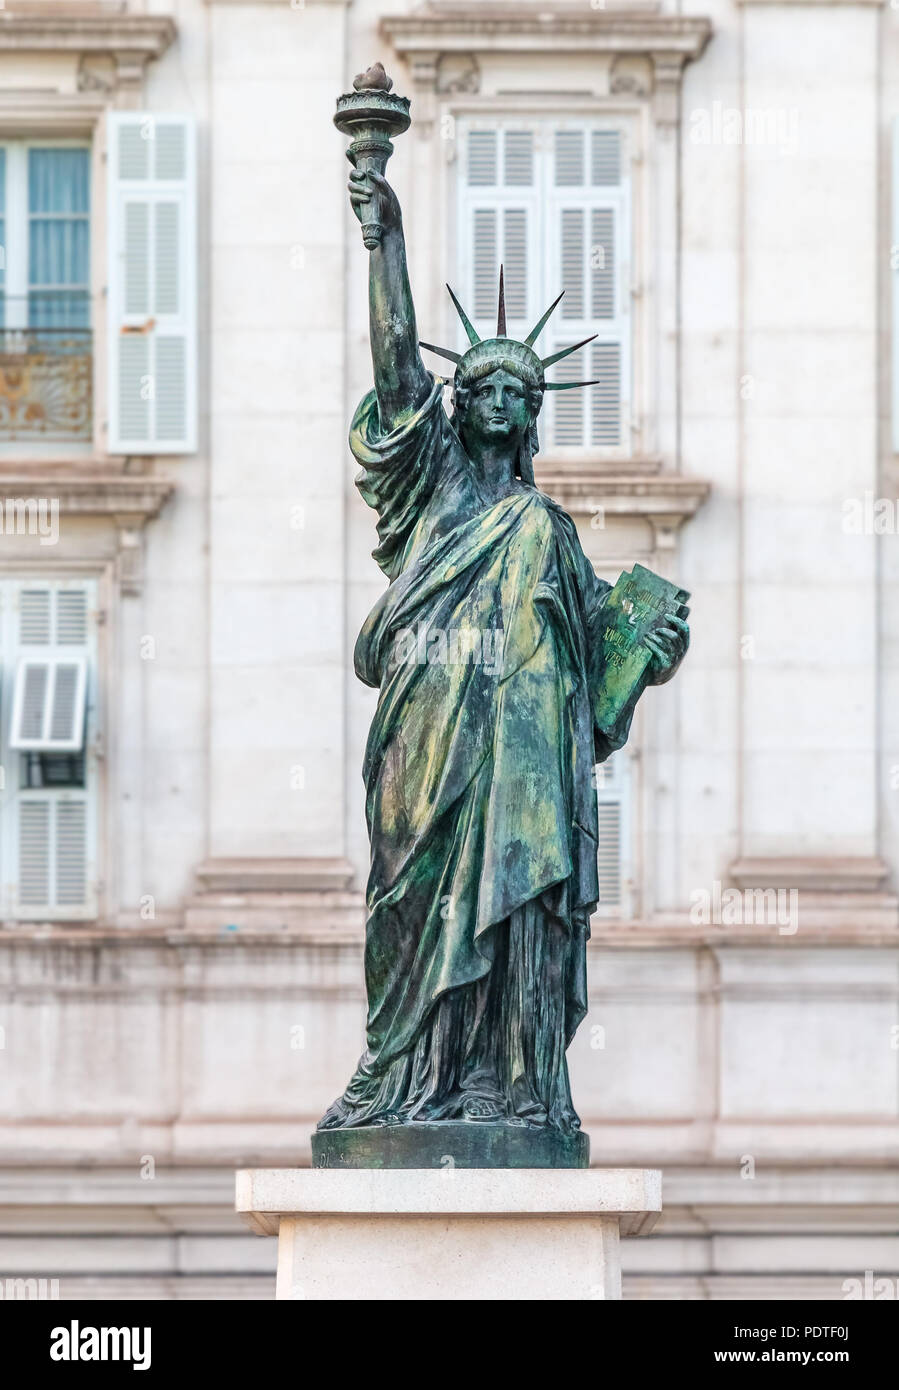 Bartholdi's New York Statue of Liberty replica in Nice France, installed on the Quai des États-Unis, across from the Opera of Nice, commemorating 100  Stock Photo